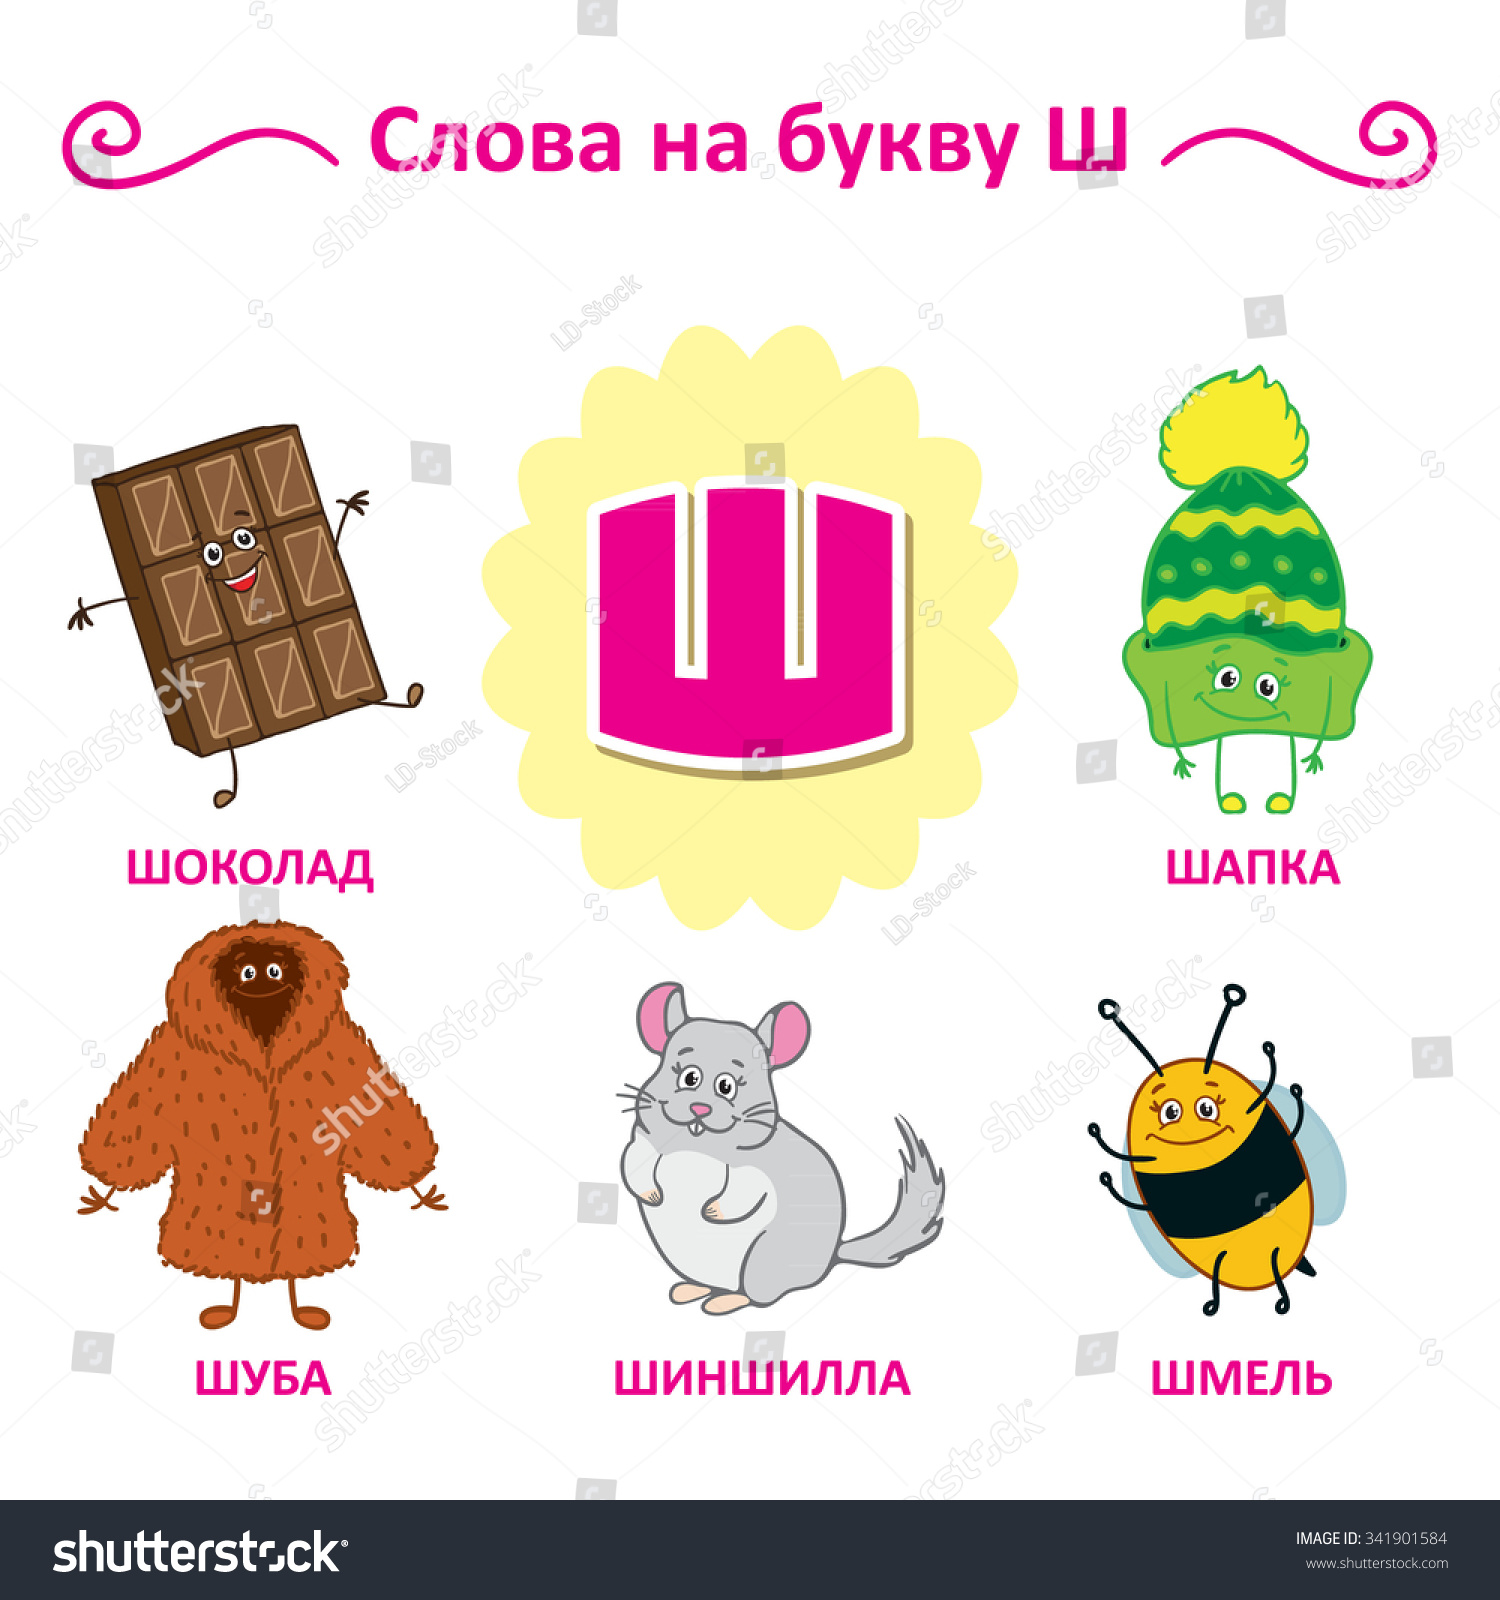 SVG of Russian alphabet. The words of that letter. Chocolate, Fur Coat, Chinchilla, Bumblebee, Hat. svg